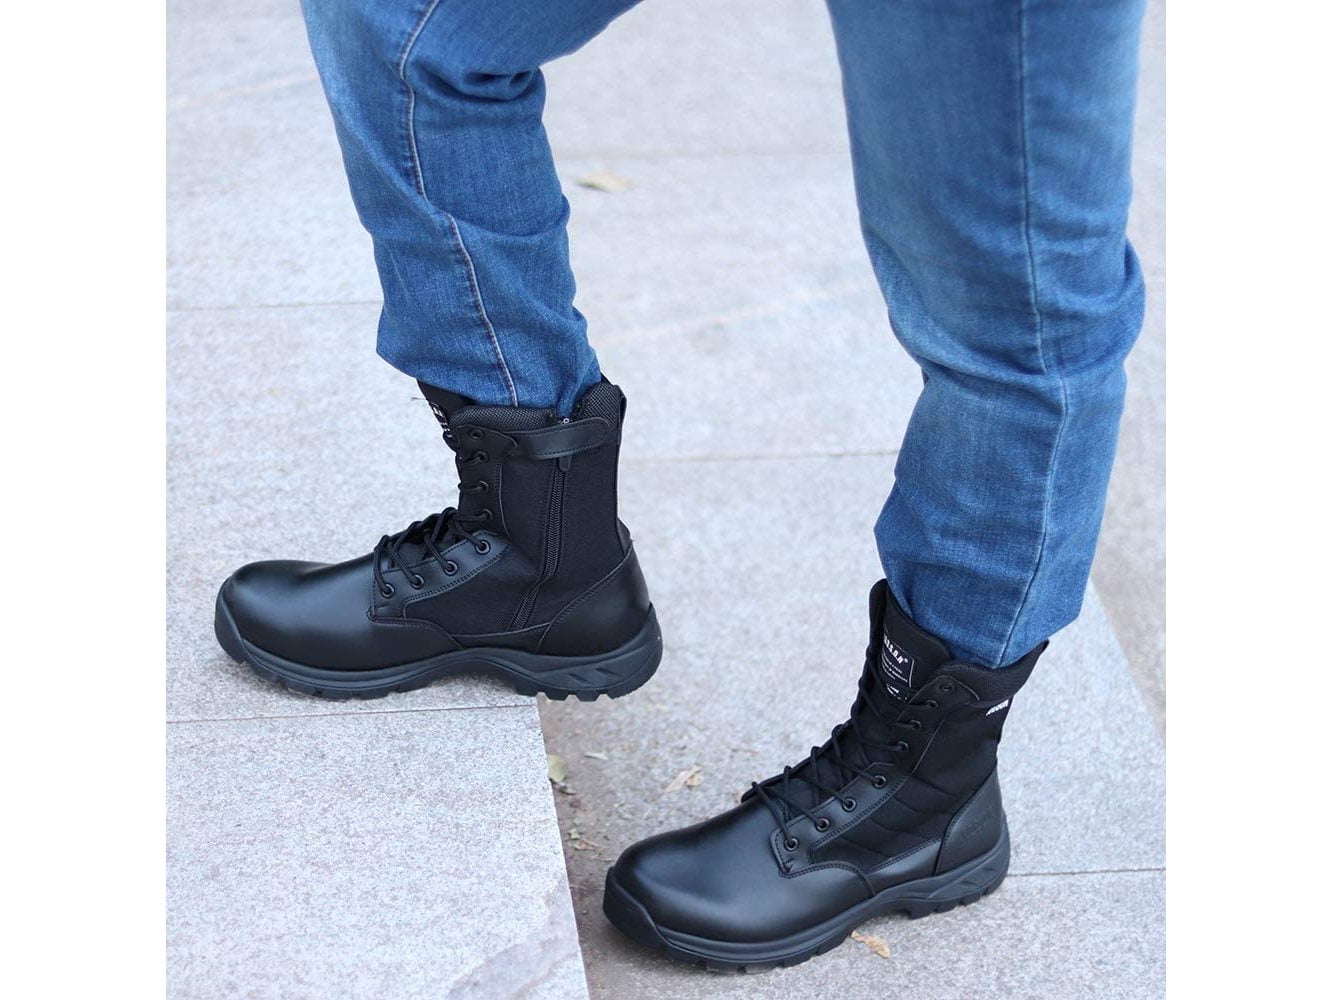 PY FLRINGPIN Women's 8 Tactical Boots Leather Military Boots Non-Slip Work Boots with Zipper